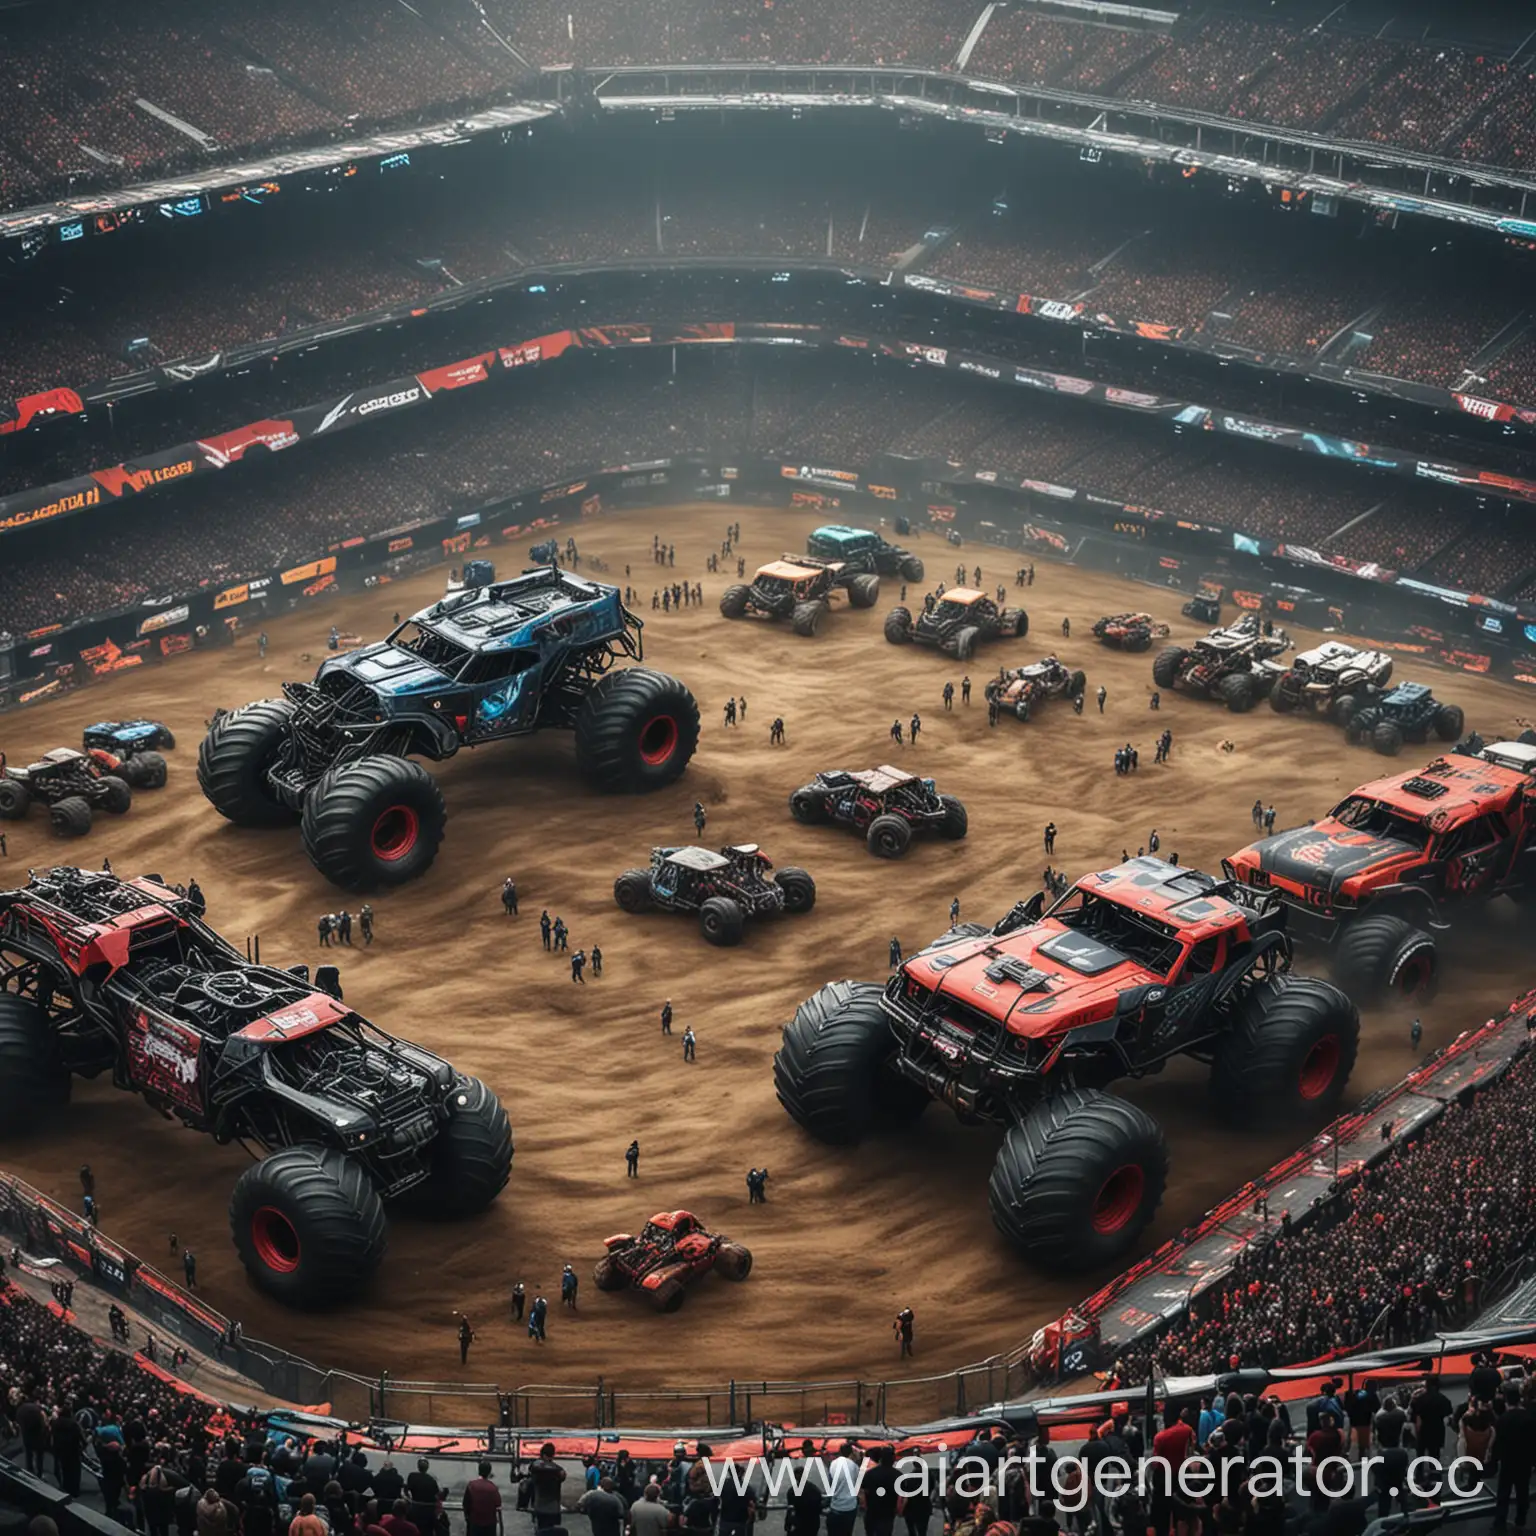 huge field with millions of spectators, cyberpunk theme, huge arena for monster trucks